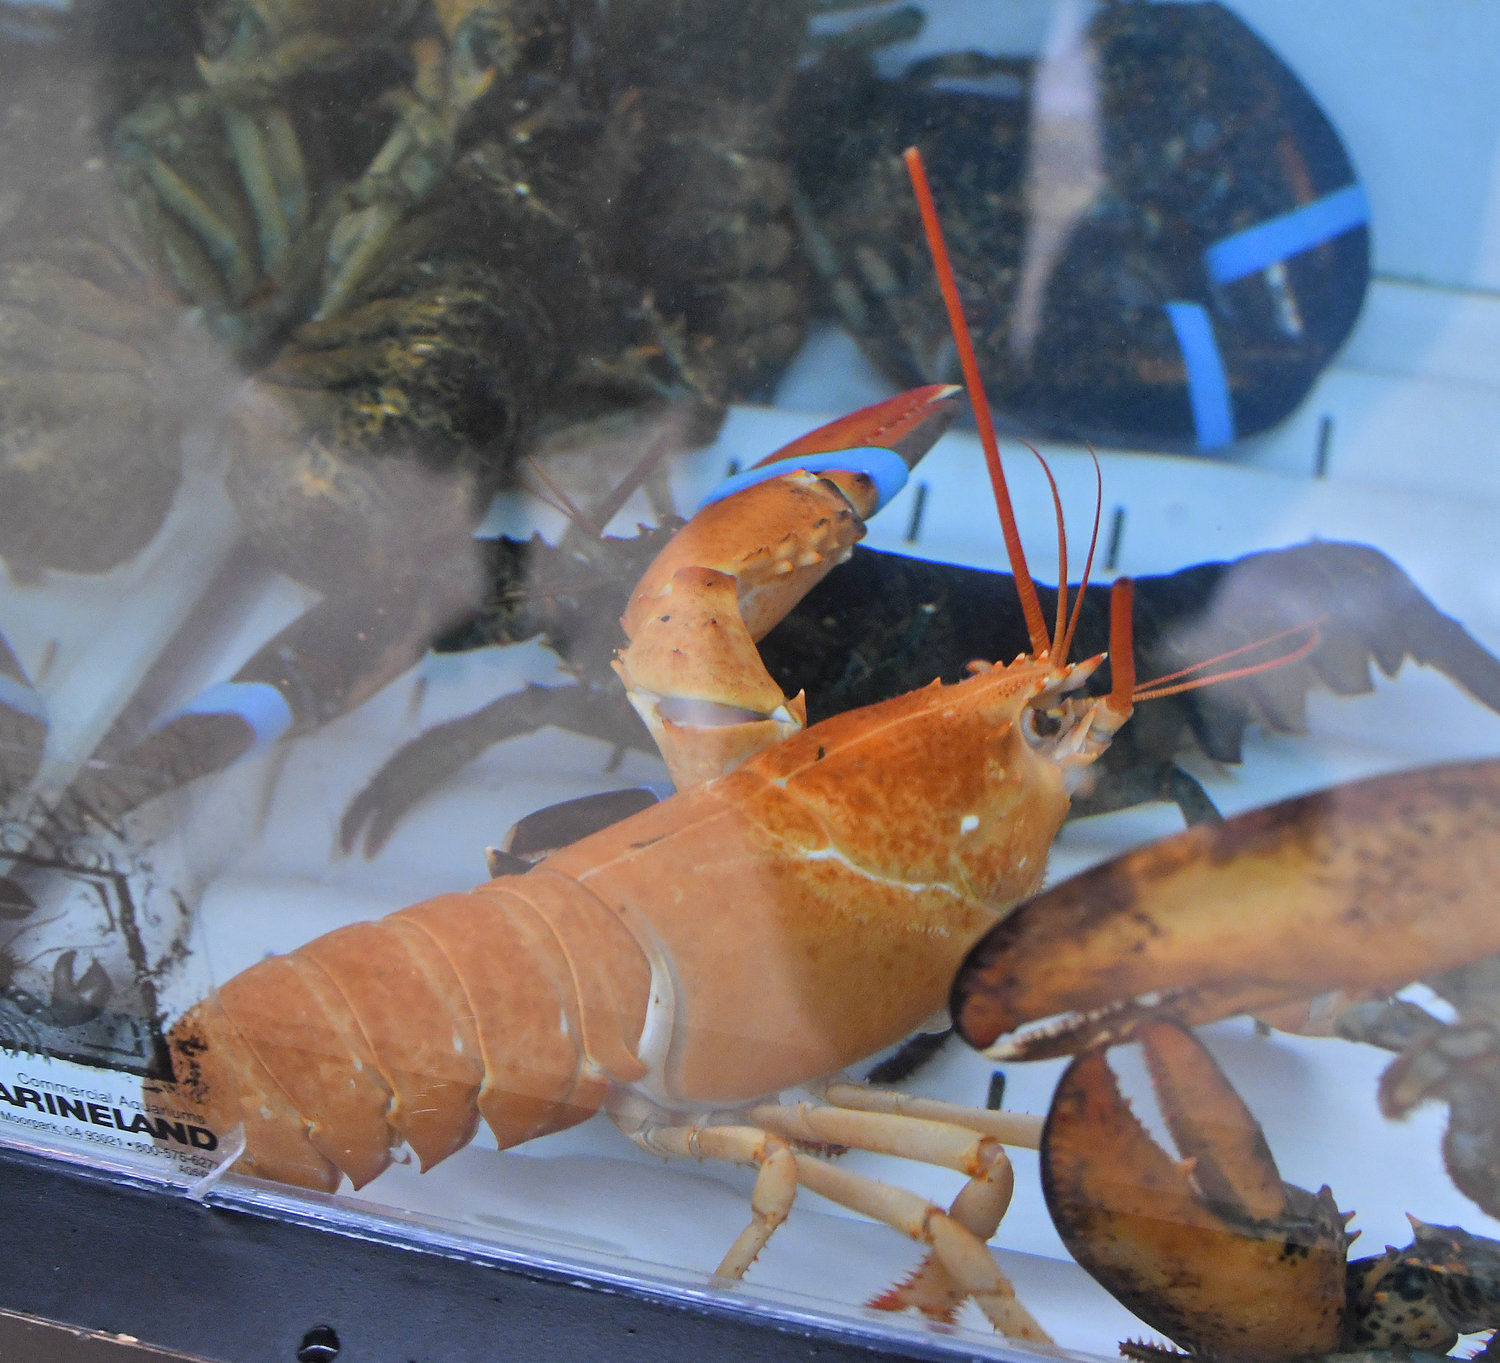 Cheeto the lobster with some of the other lobster in the Tops Friendly Market in Manlius tank Wednesday, Aug. 3, 2022.